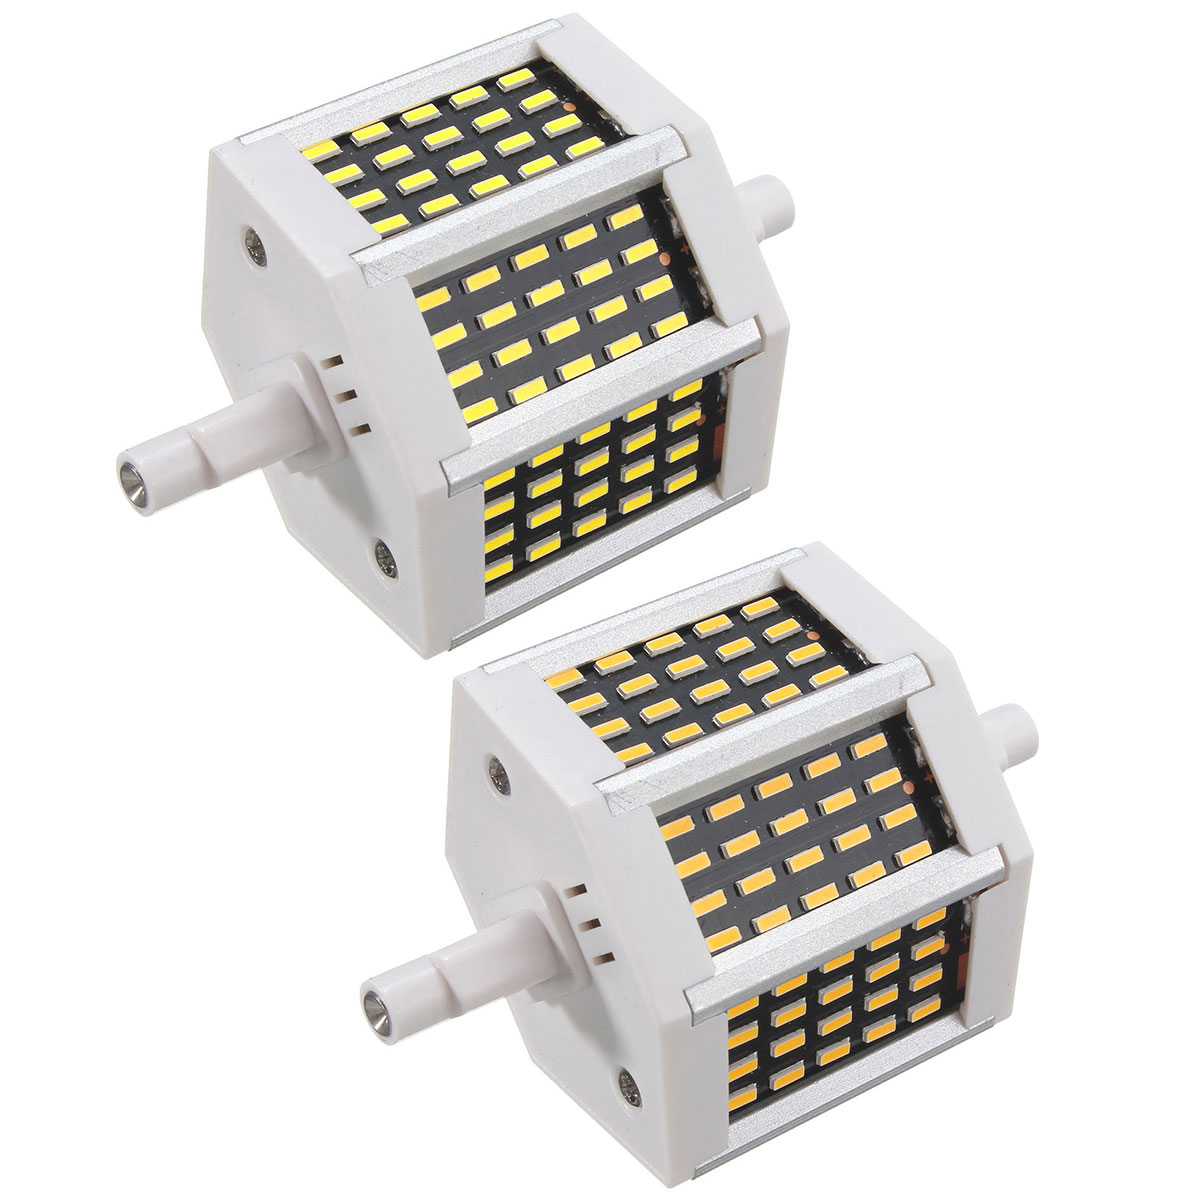 Dimmable-R7S-78mm-8W-60-SMD-4014-LED-Black-Plate-Warm-White-White-Lamp-Light-Bulb-AC220VAC110V-1051521-5